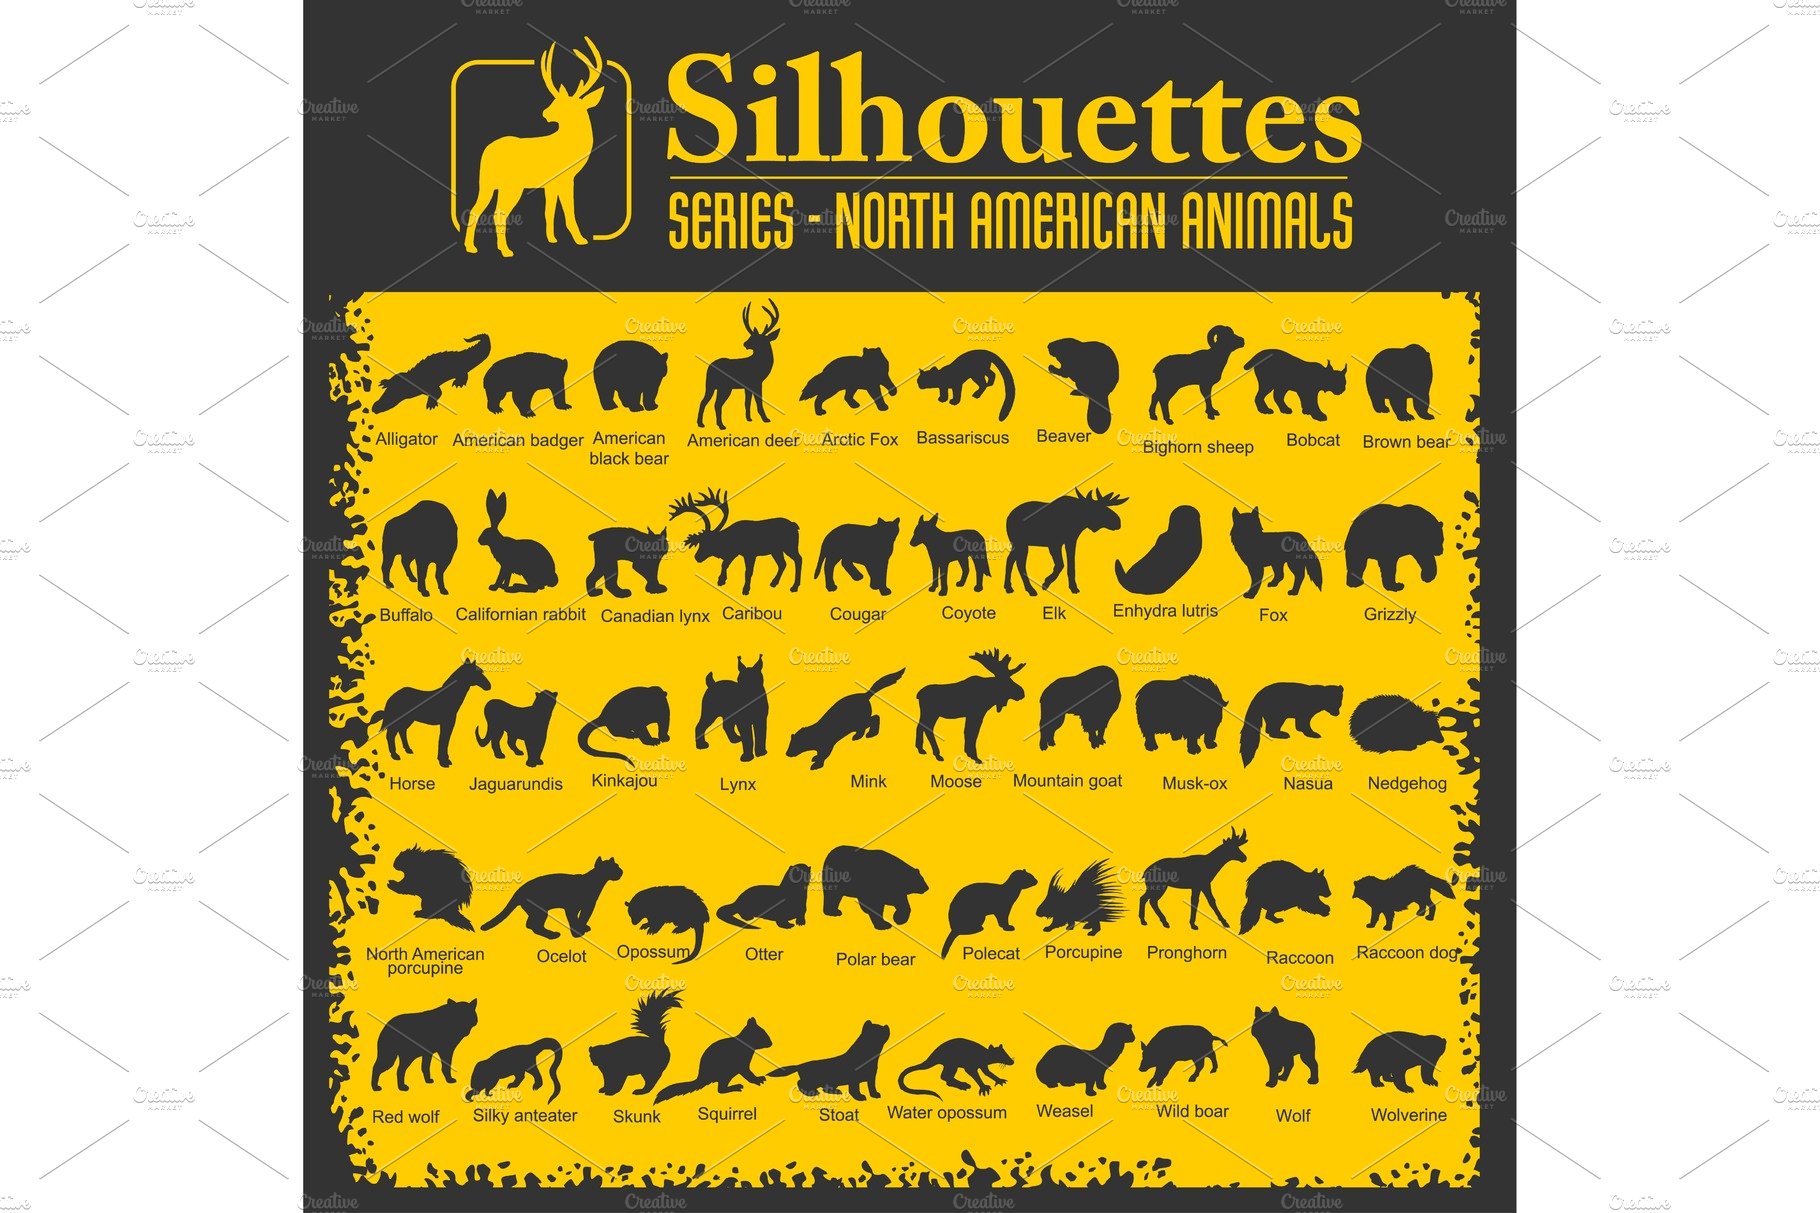 Silhouettes - North American animals cover image.